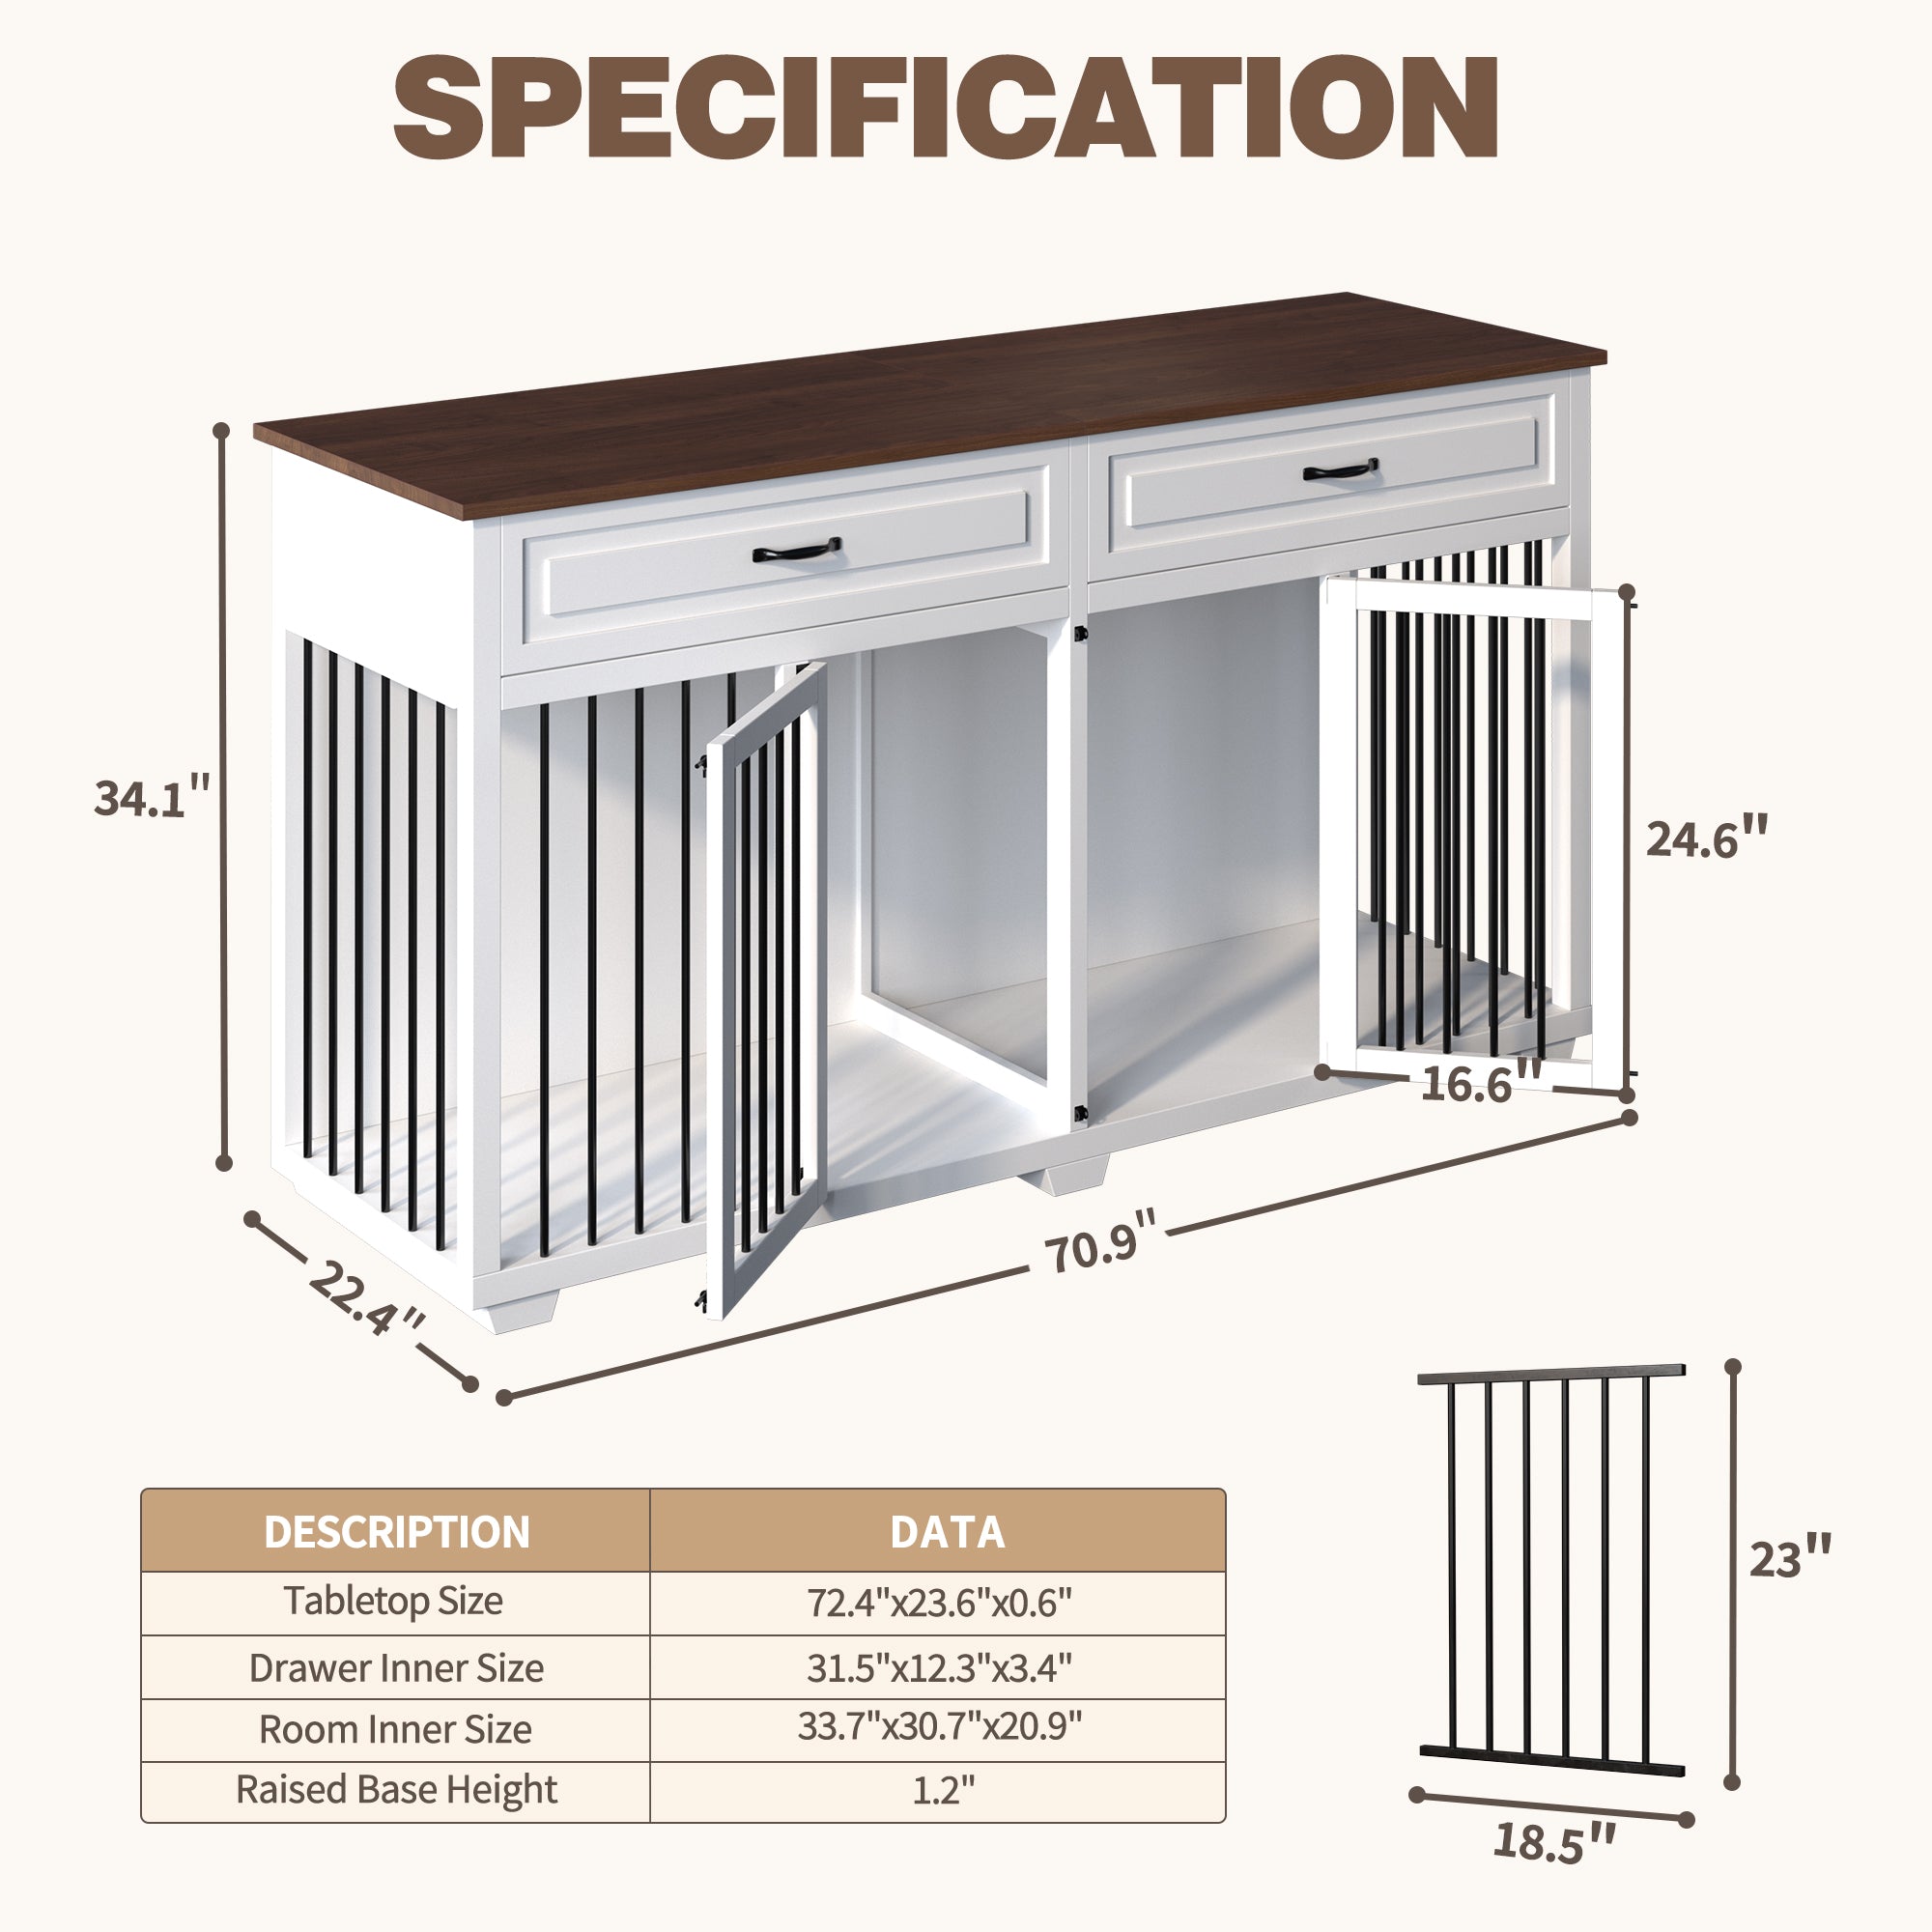 Large Dog Crate Furniture Wooden Dog Crate Kennel with 2 Drawers and Divider